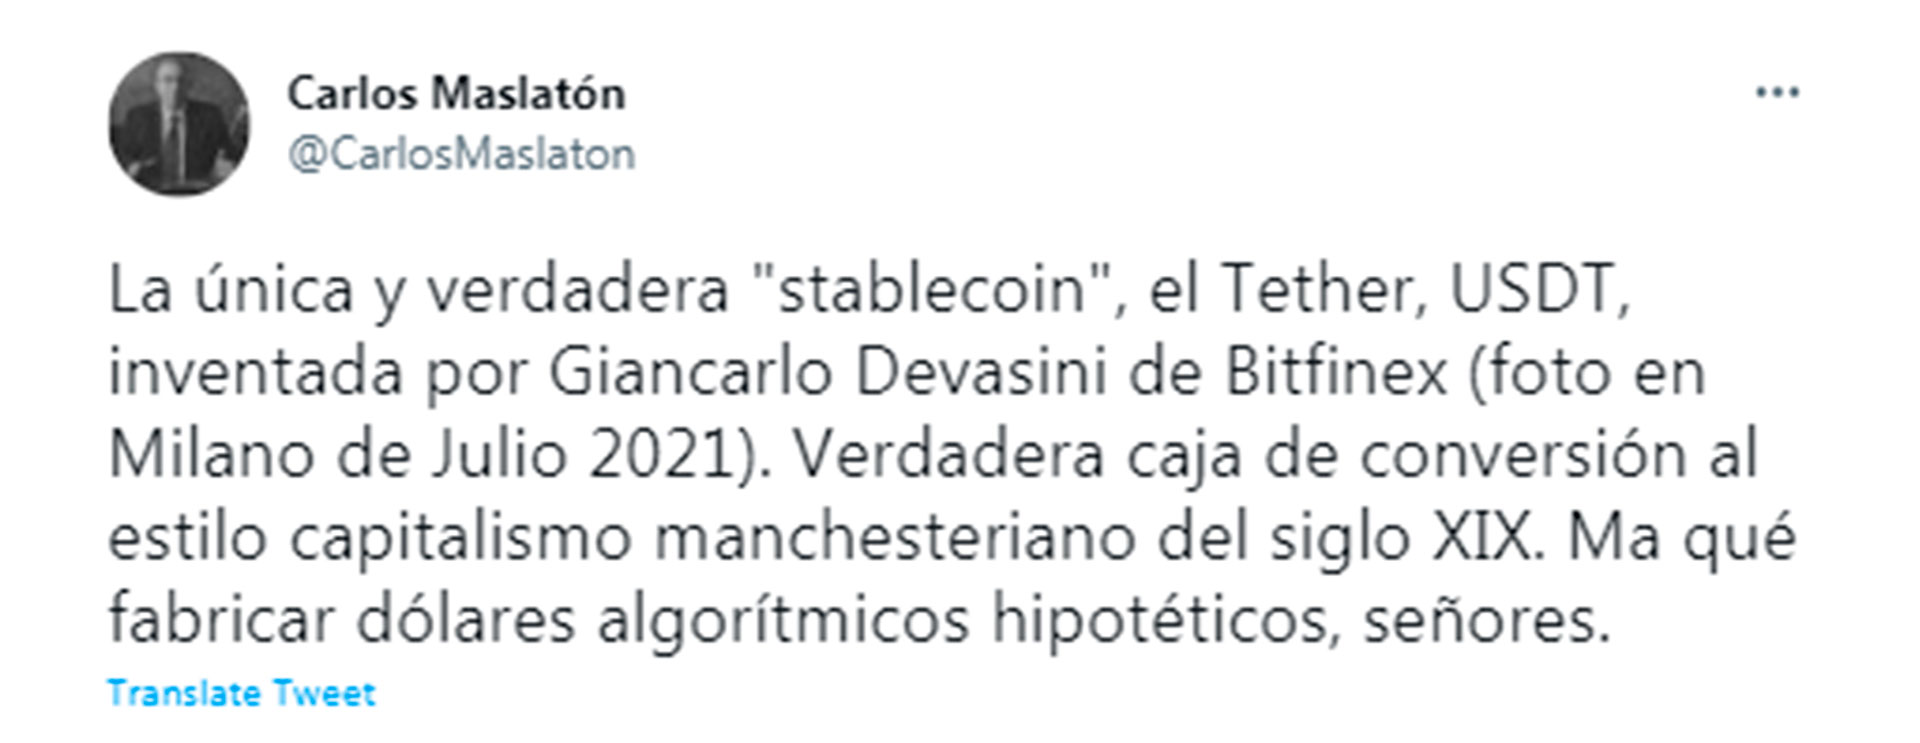 Maslatón against UST and in favor of Tether, the correct stablecoin according to your preferences